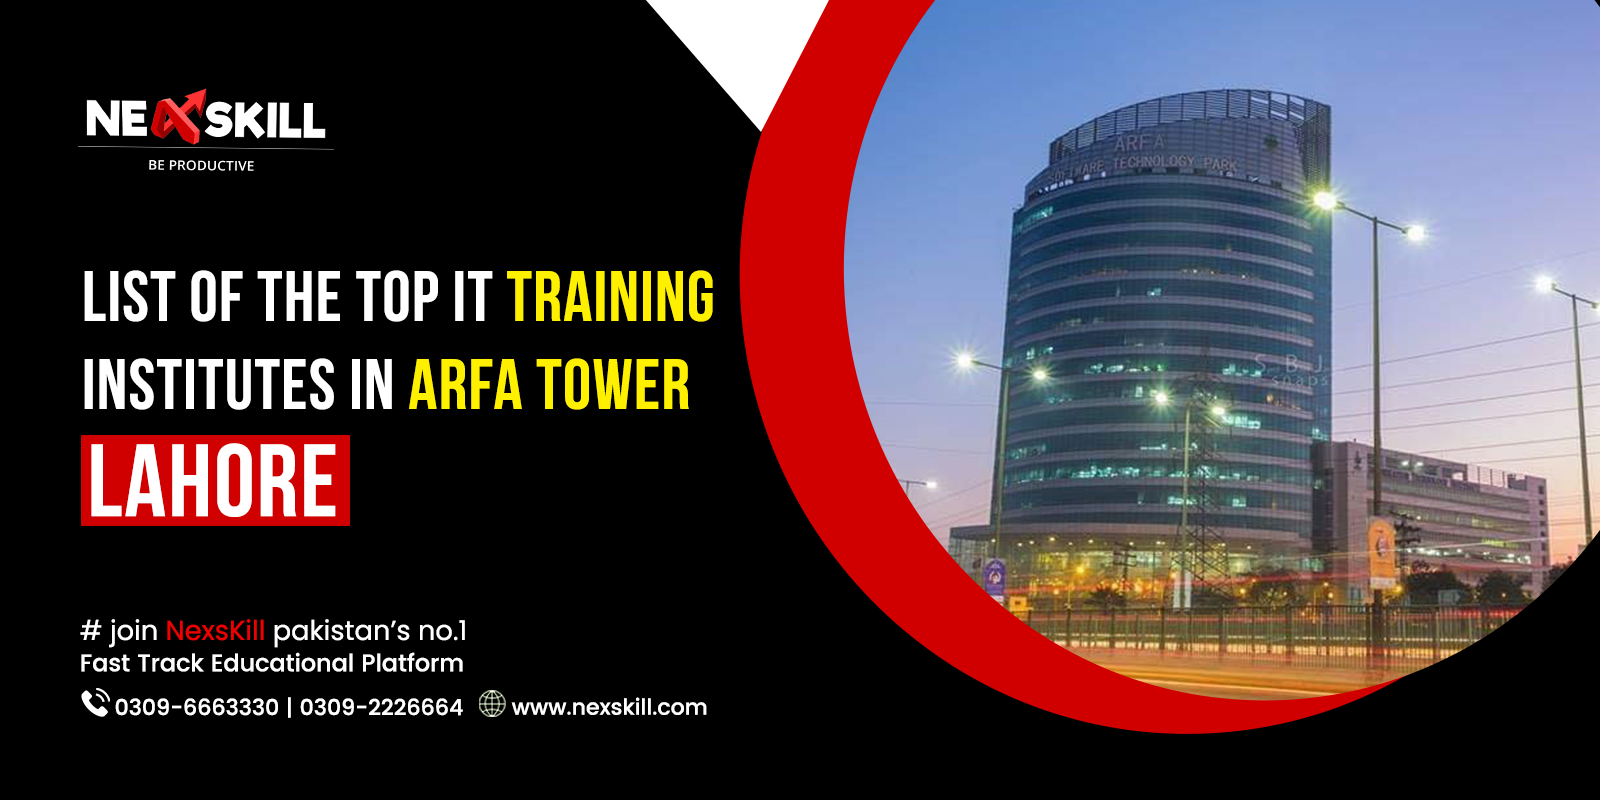 List of the Top IT Training Institutes in Arfa Tower Lahore